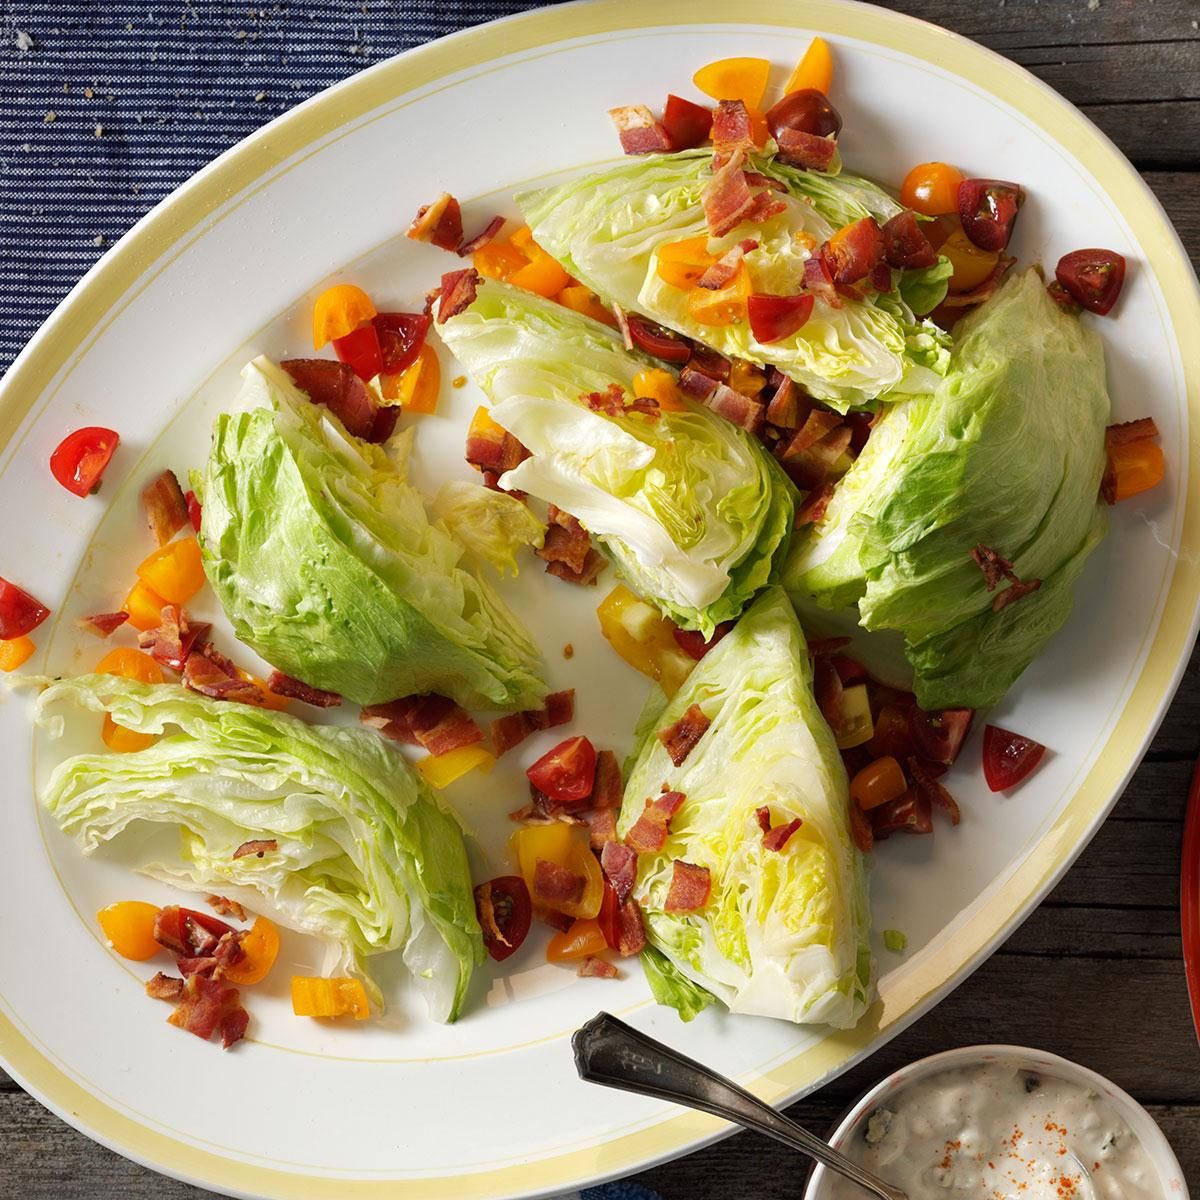 Inspired by Outback Blue Cheese Wedge Salad